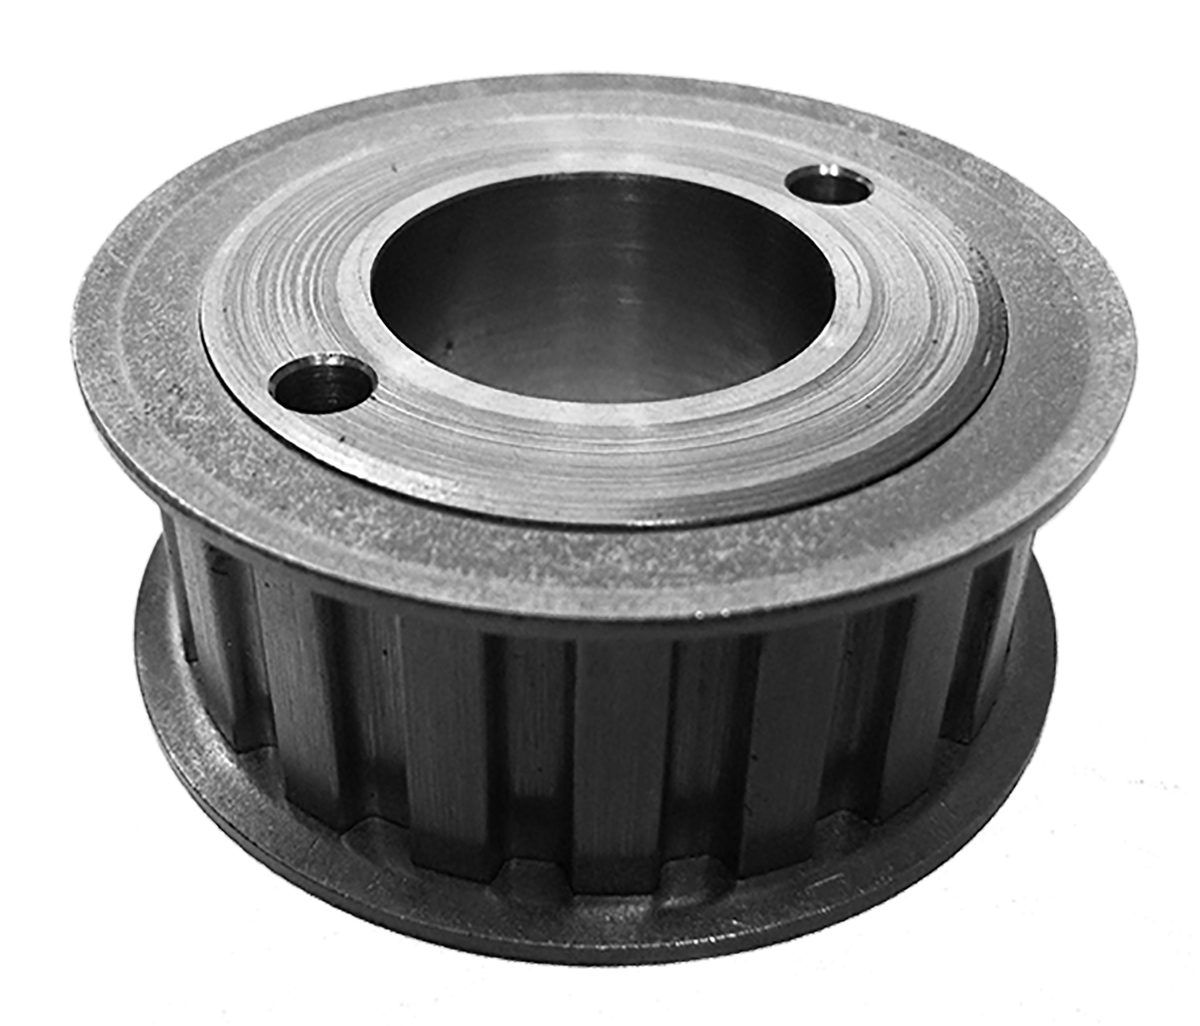 120LH075 - Cast Iron Imperial Pitch Pulleys